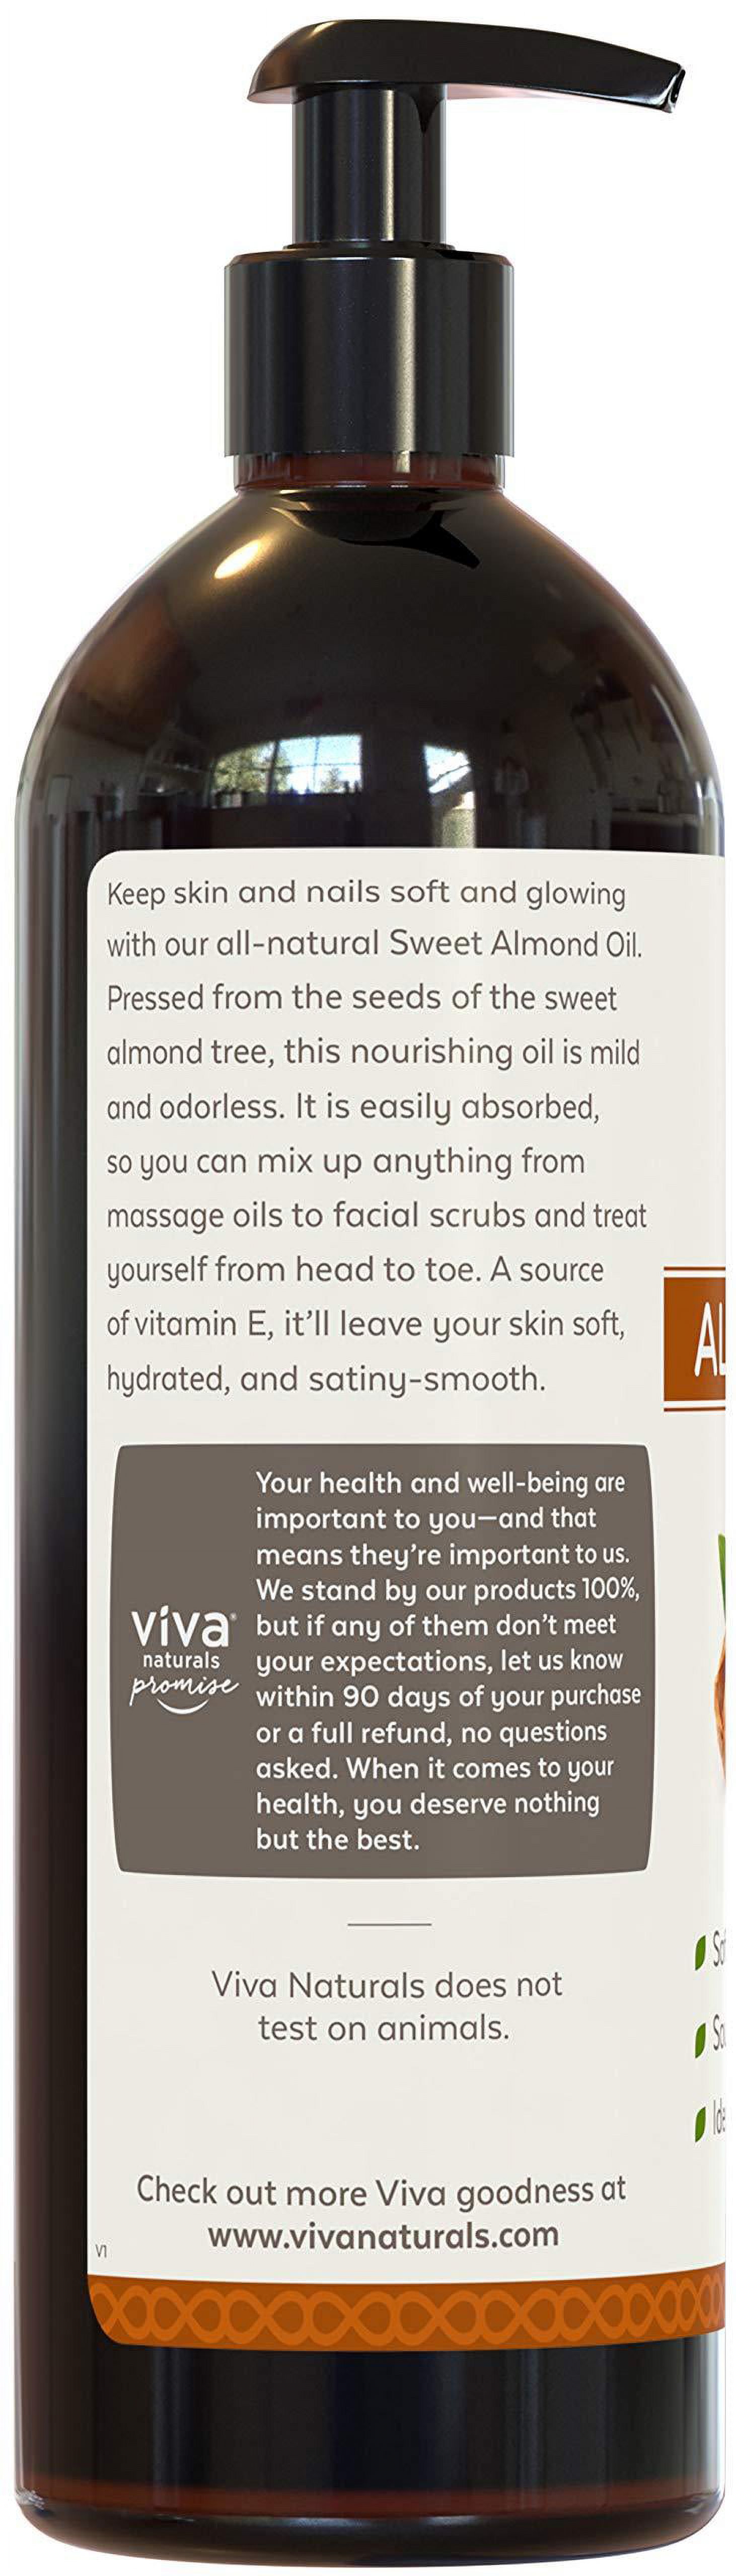 Almond Oil (16 oz); Sweet Almond Oil for Skin or Almond Oil for Hair, The Perfect Natural Body Oil for Women, Great as Unscented Massage Oil - image 3 of 5